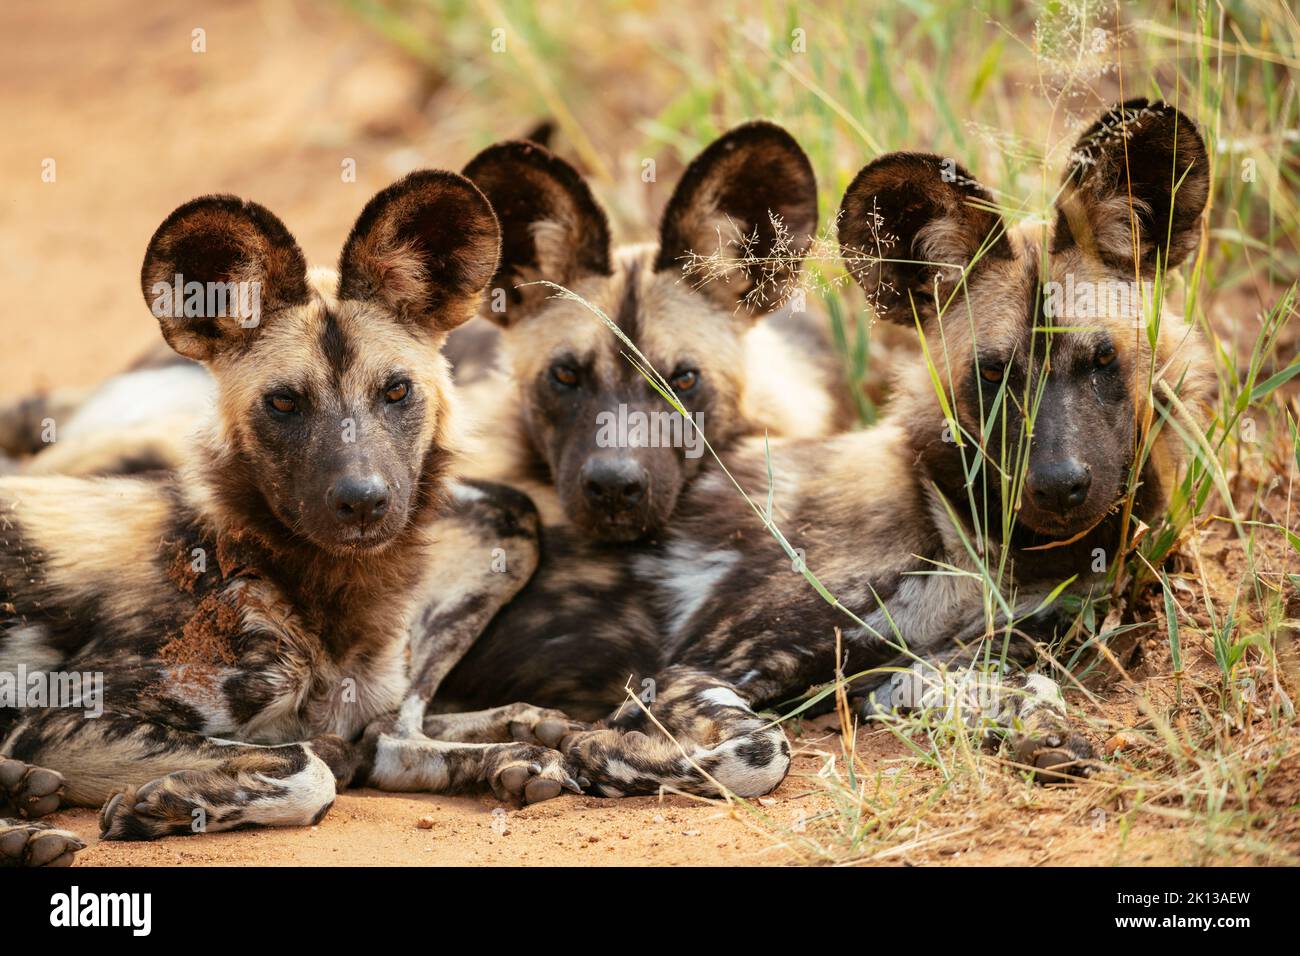 African Wild Dogs (Painted Wolves), Timbavati Private Nature Reserve, Kruger National Park, South Africa, Africa Stock Photo